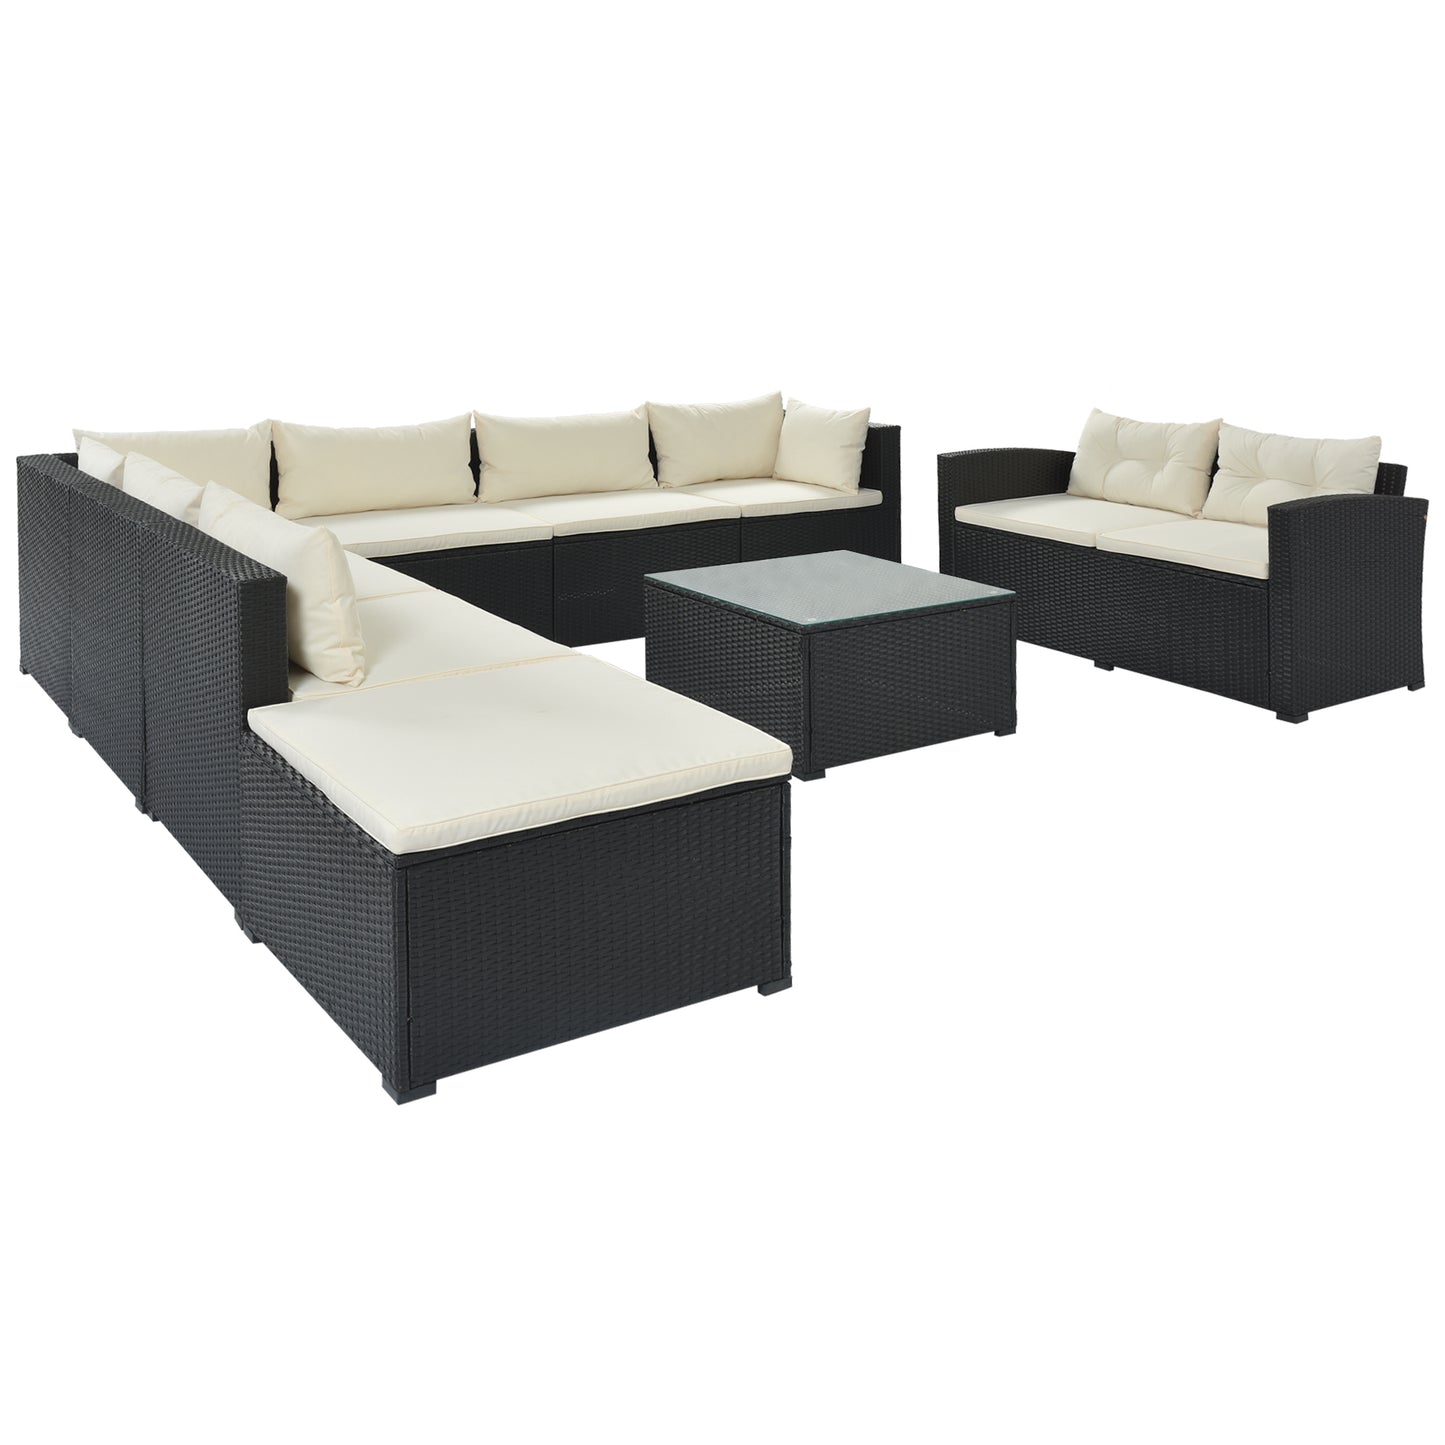 9-piece Beige Cushion and Black Rattan Outdoor Patio Sectional Sofa Set, for Garden, Backyard, Porch and Poolside